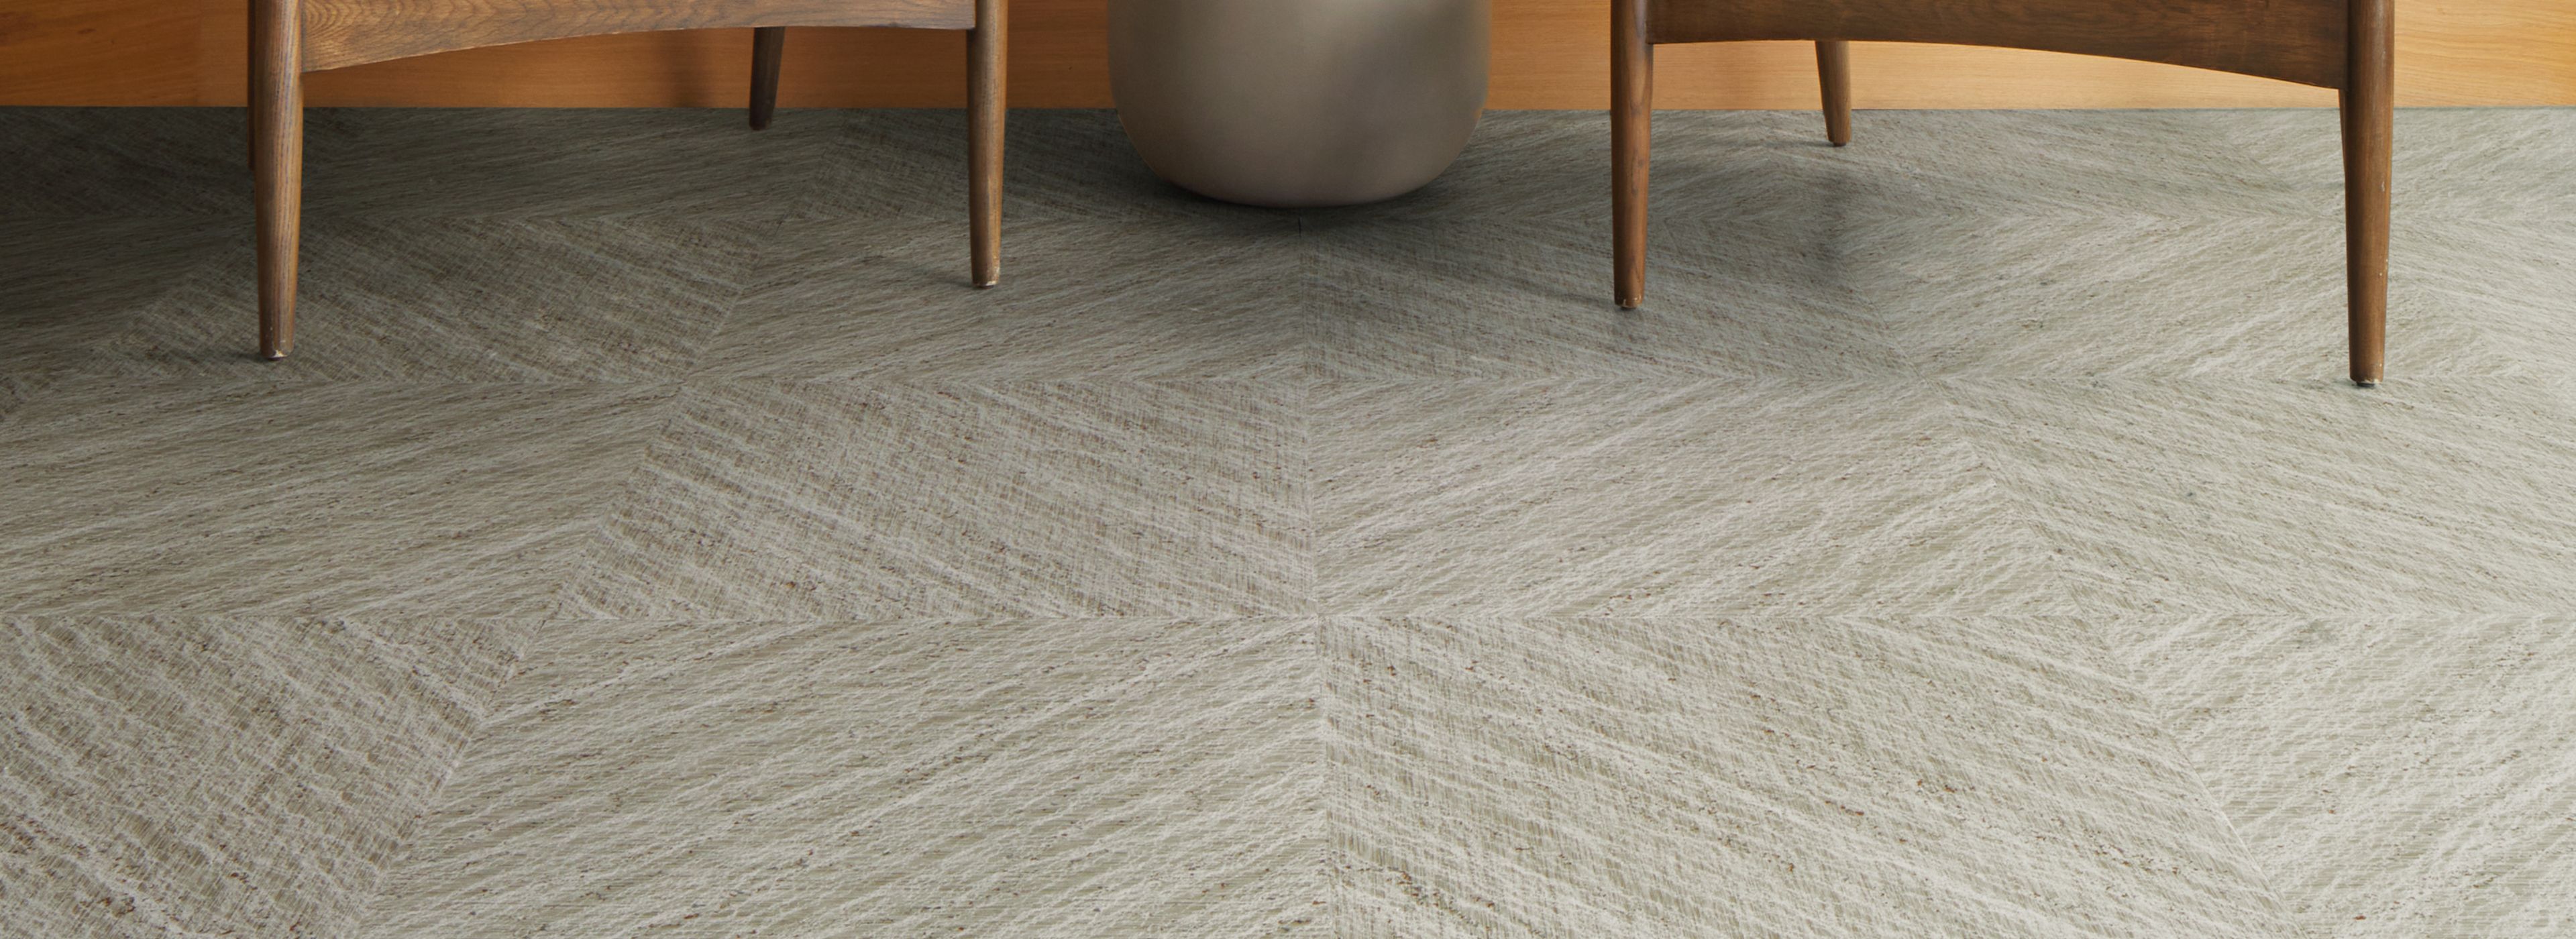 image Interface Ridge LVT in Agate shown in a casual seating area numéro 1